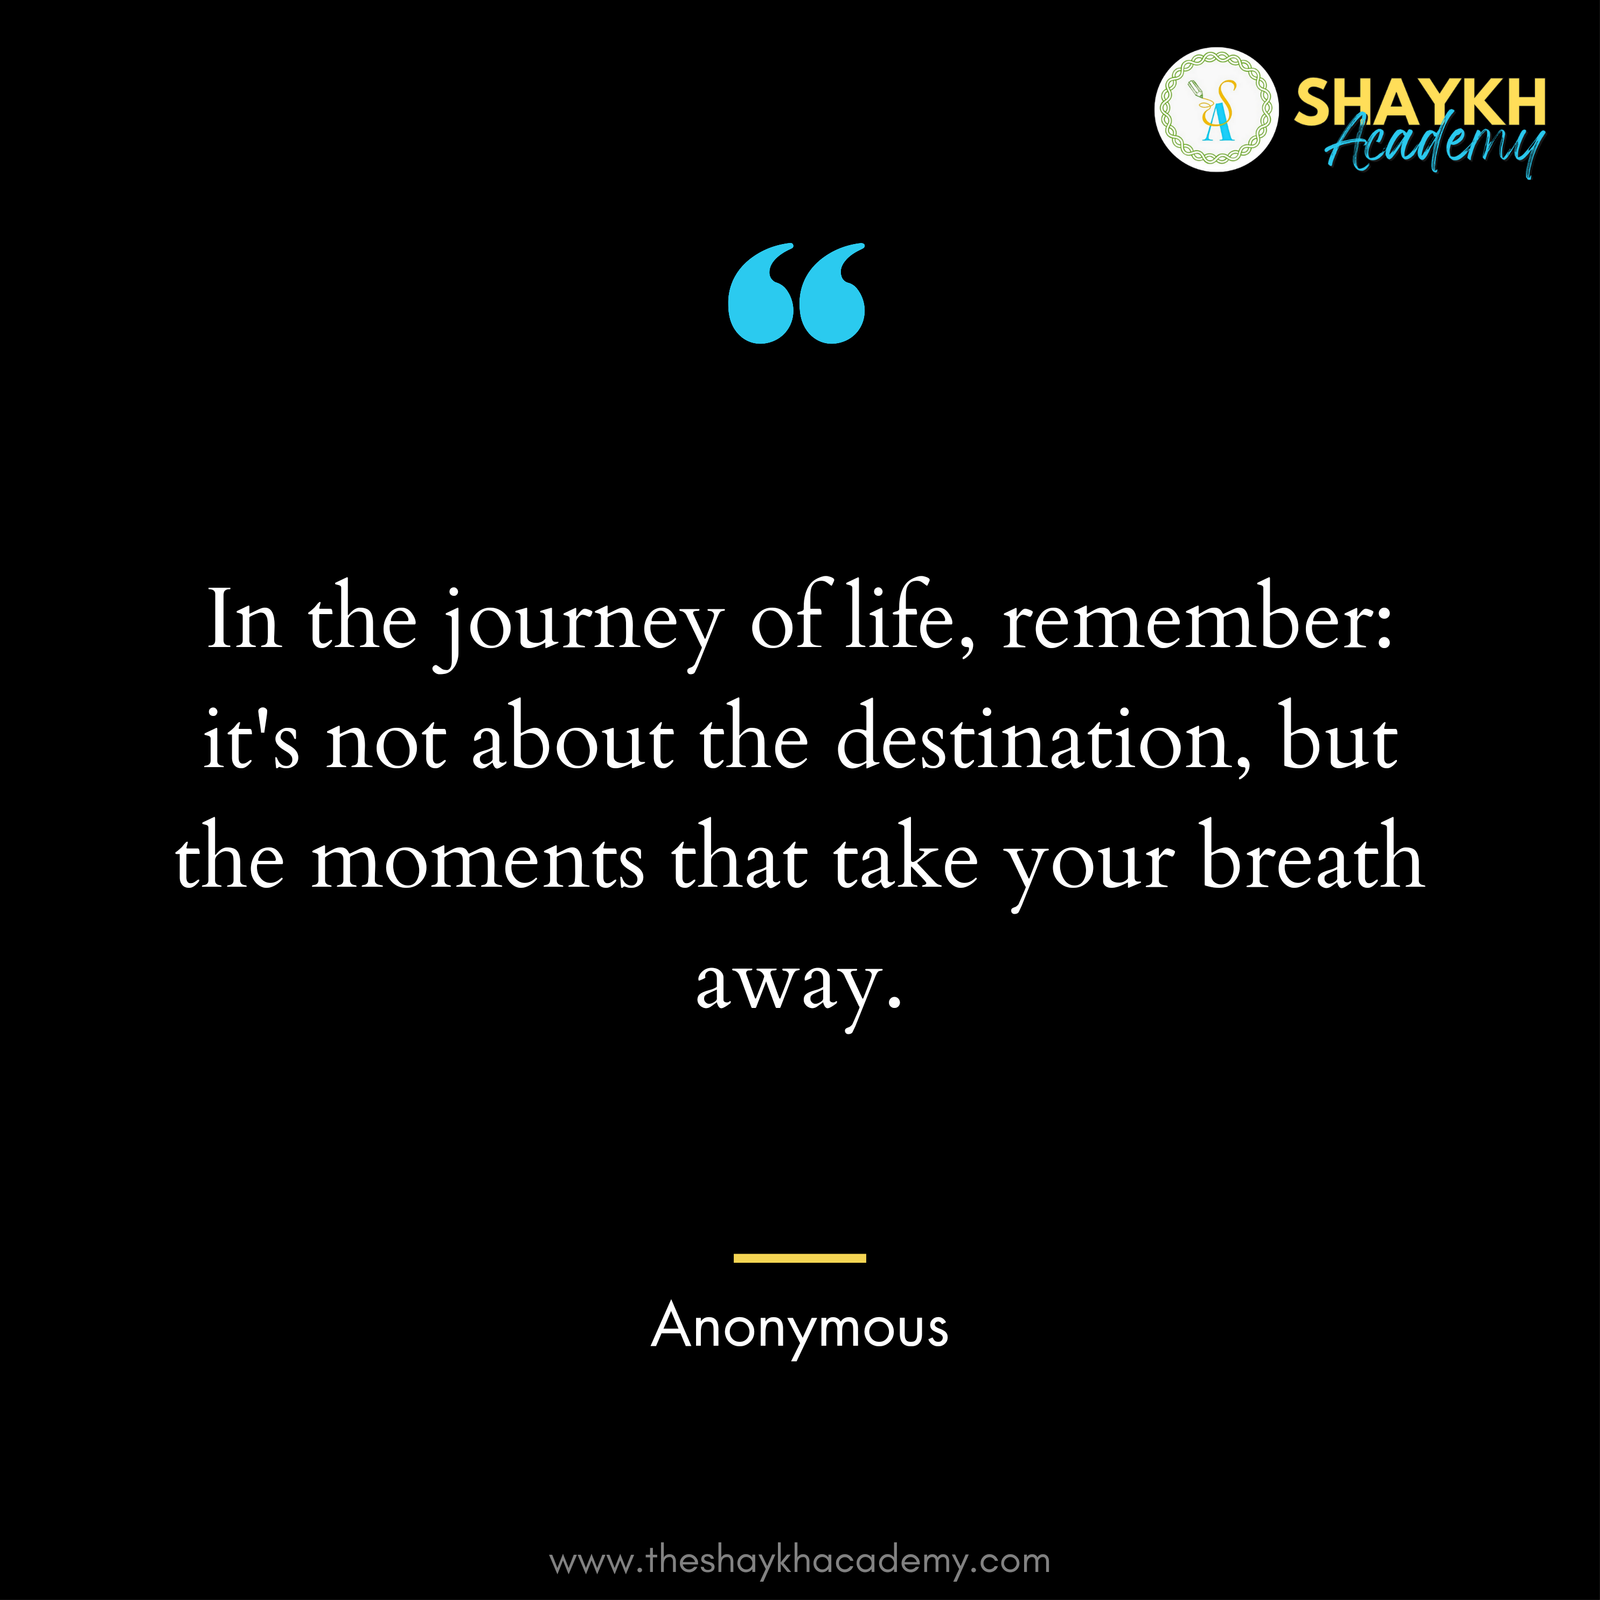 In the journey of life, remember: it's not about the destination, but the moments that take your breath away.